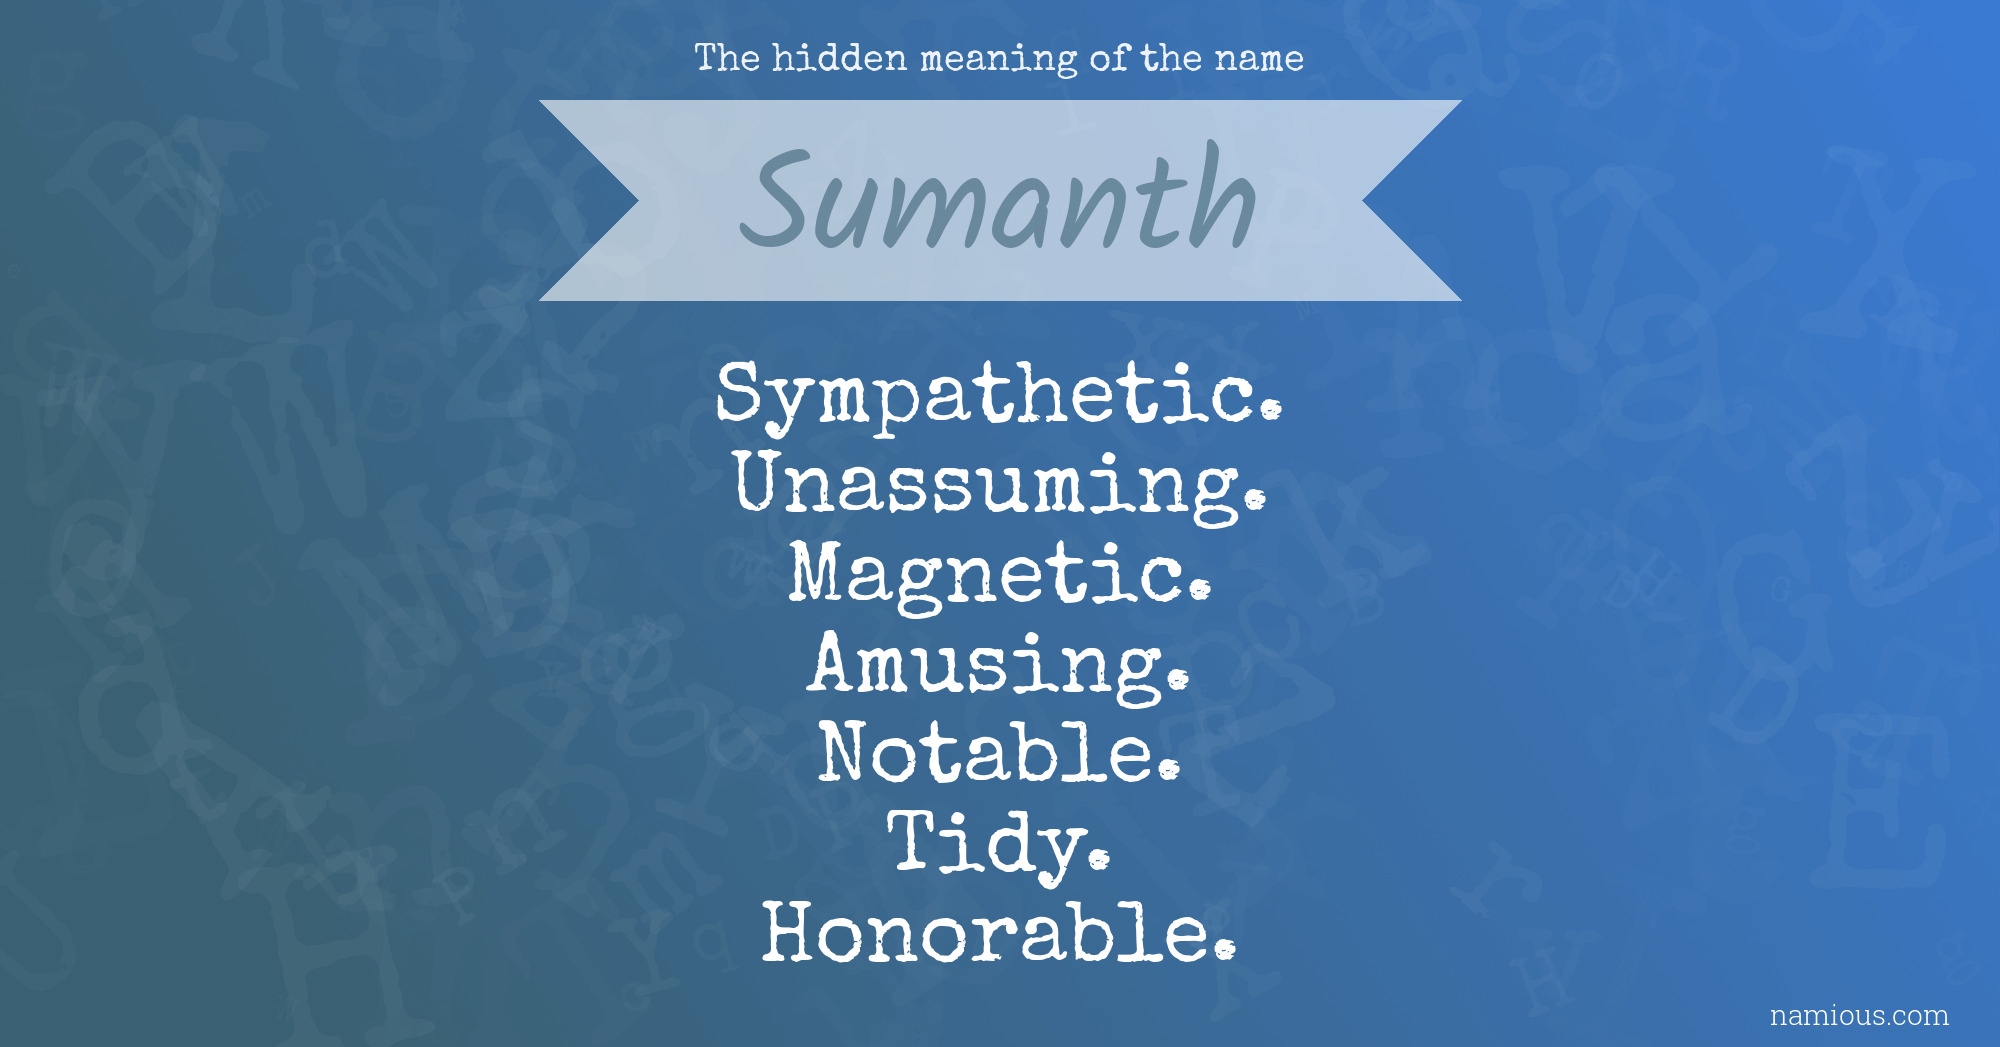 The hidden meaning of the name Sumanth